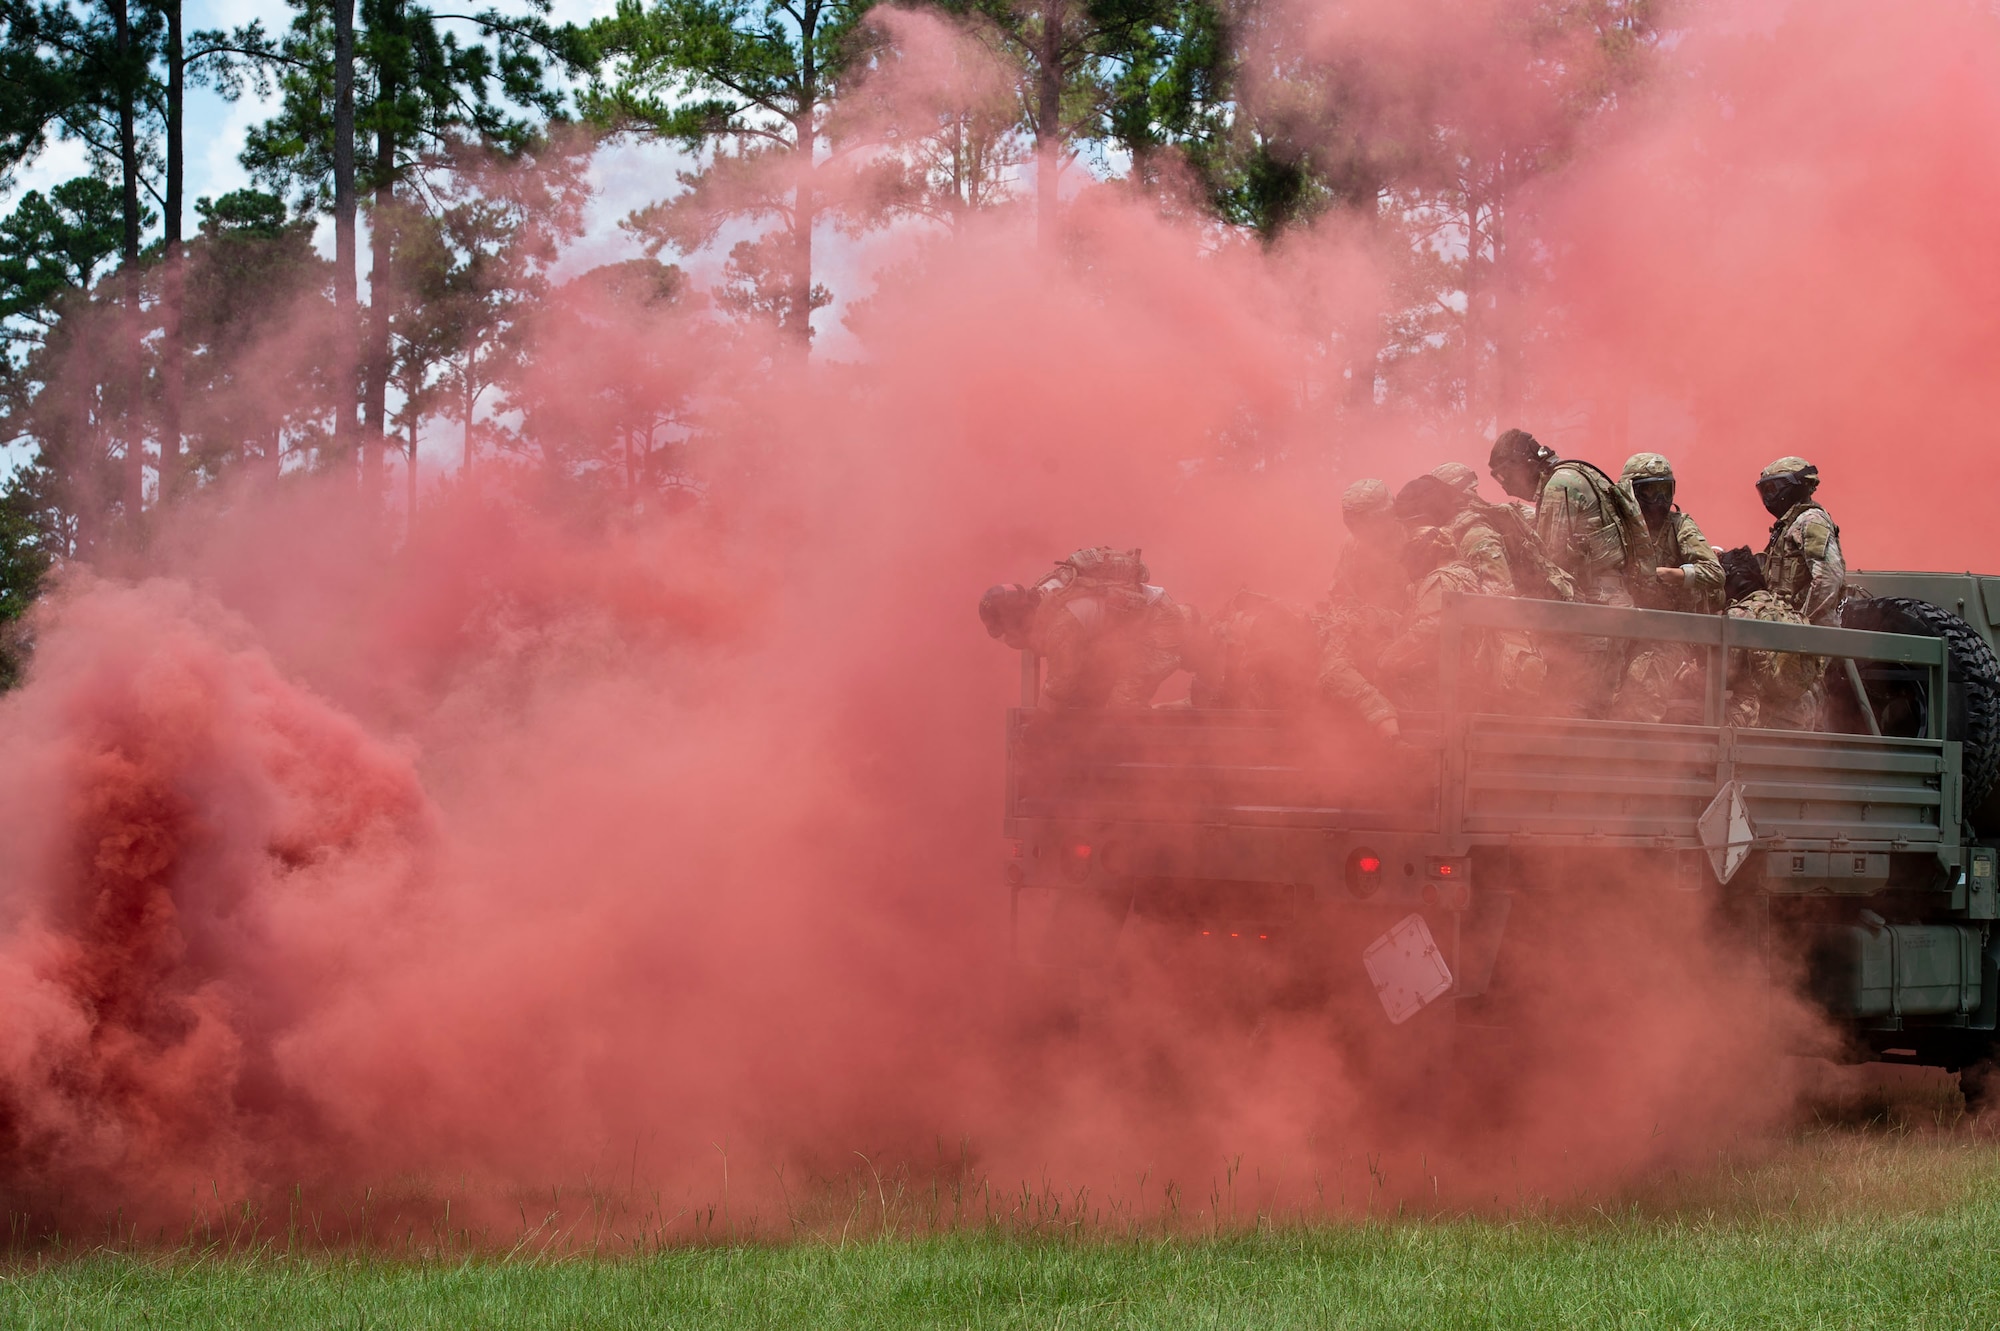 Airmen from the 824th Base Defense Squadron move through red smoke during the Tactical Leaders Course, Aug. 10, 2019, at Moody Air Force Base, Ga. The 7-day course revolved around squad leaders developing their skills to effectively communicate, team build and mission plan. These skills were assessed during a 36-hour simulated operation where squad leaders lead Airmen through tactical situations. (U.S. Air Force photo by Airman Azaria E. Foster)